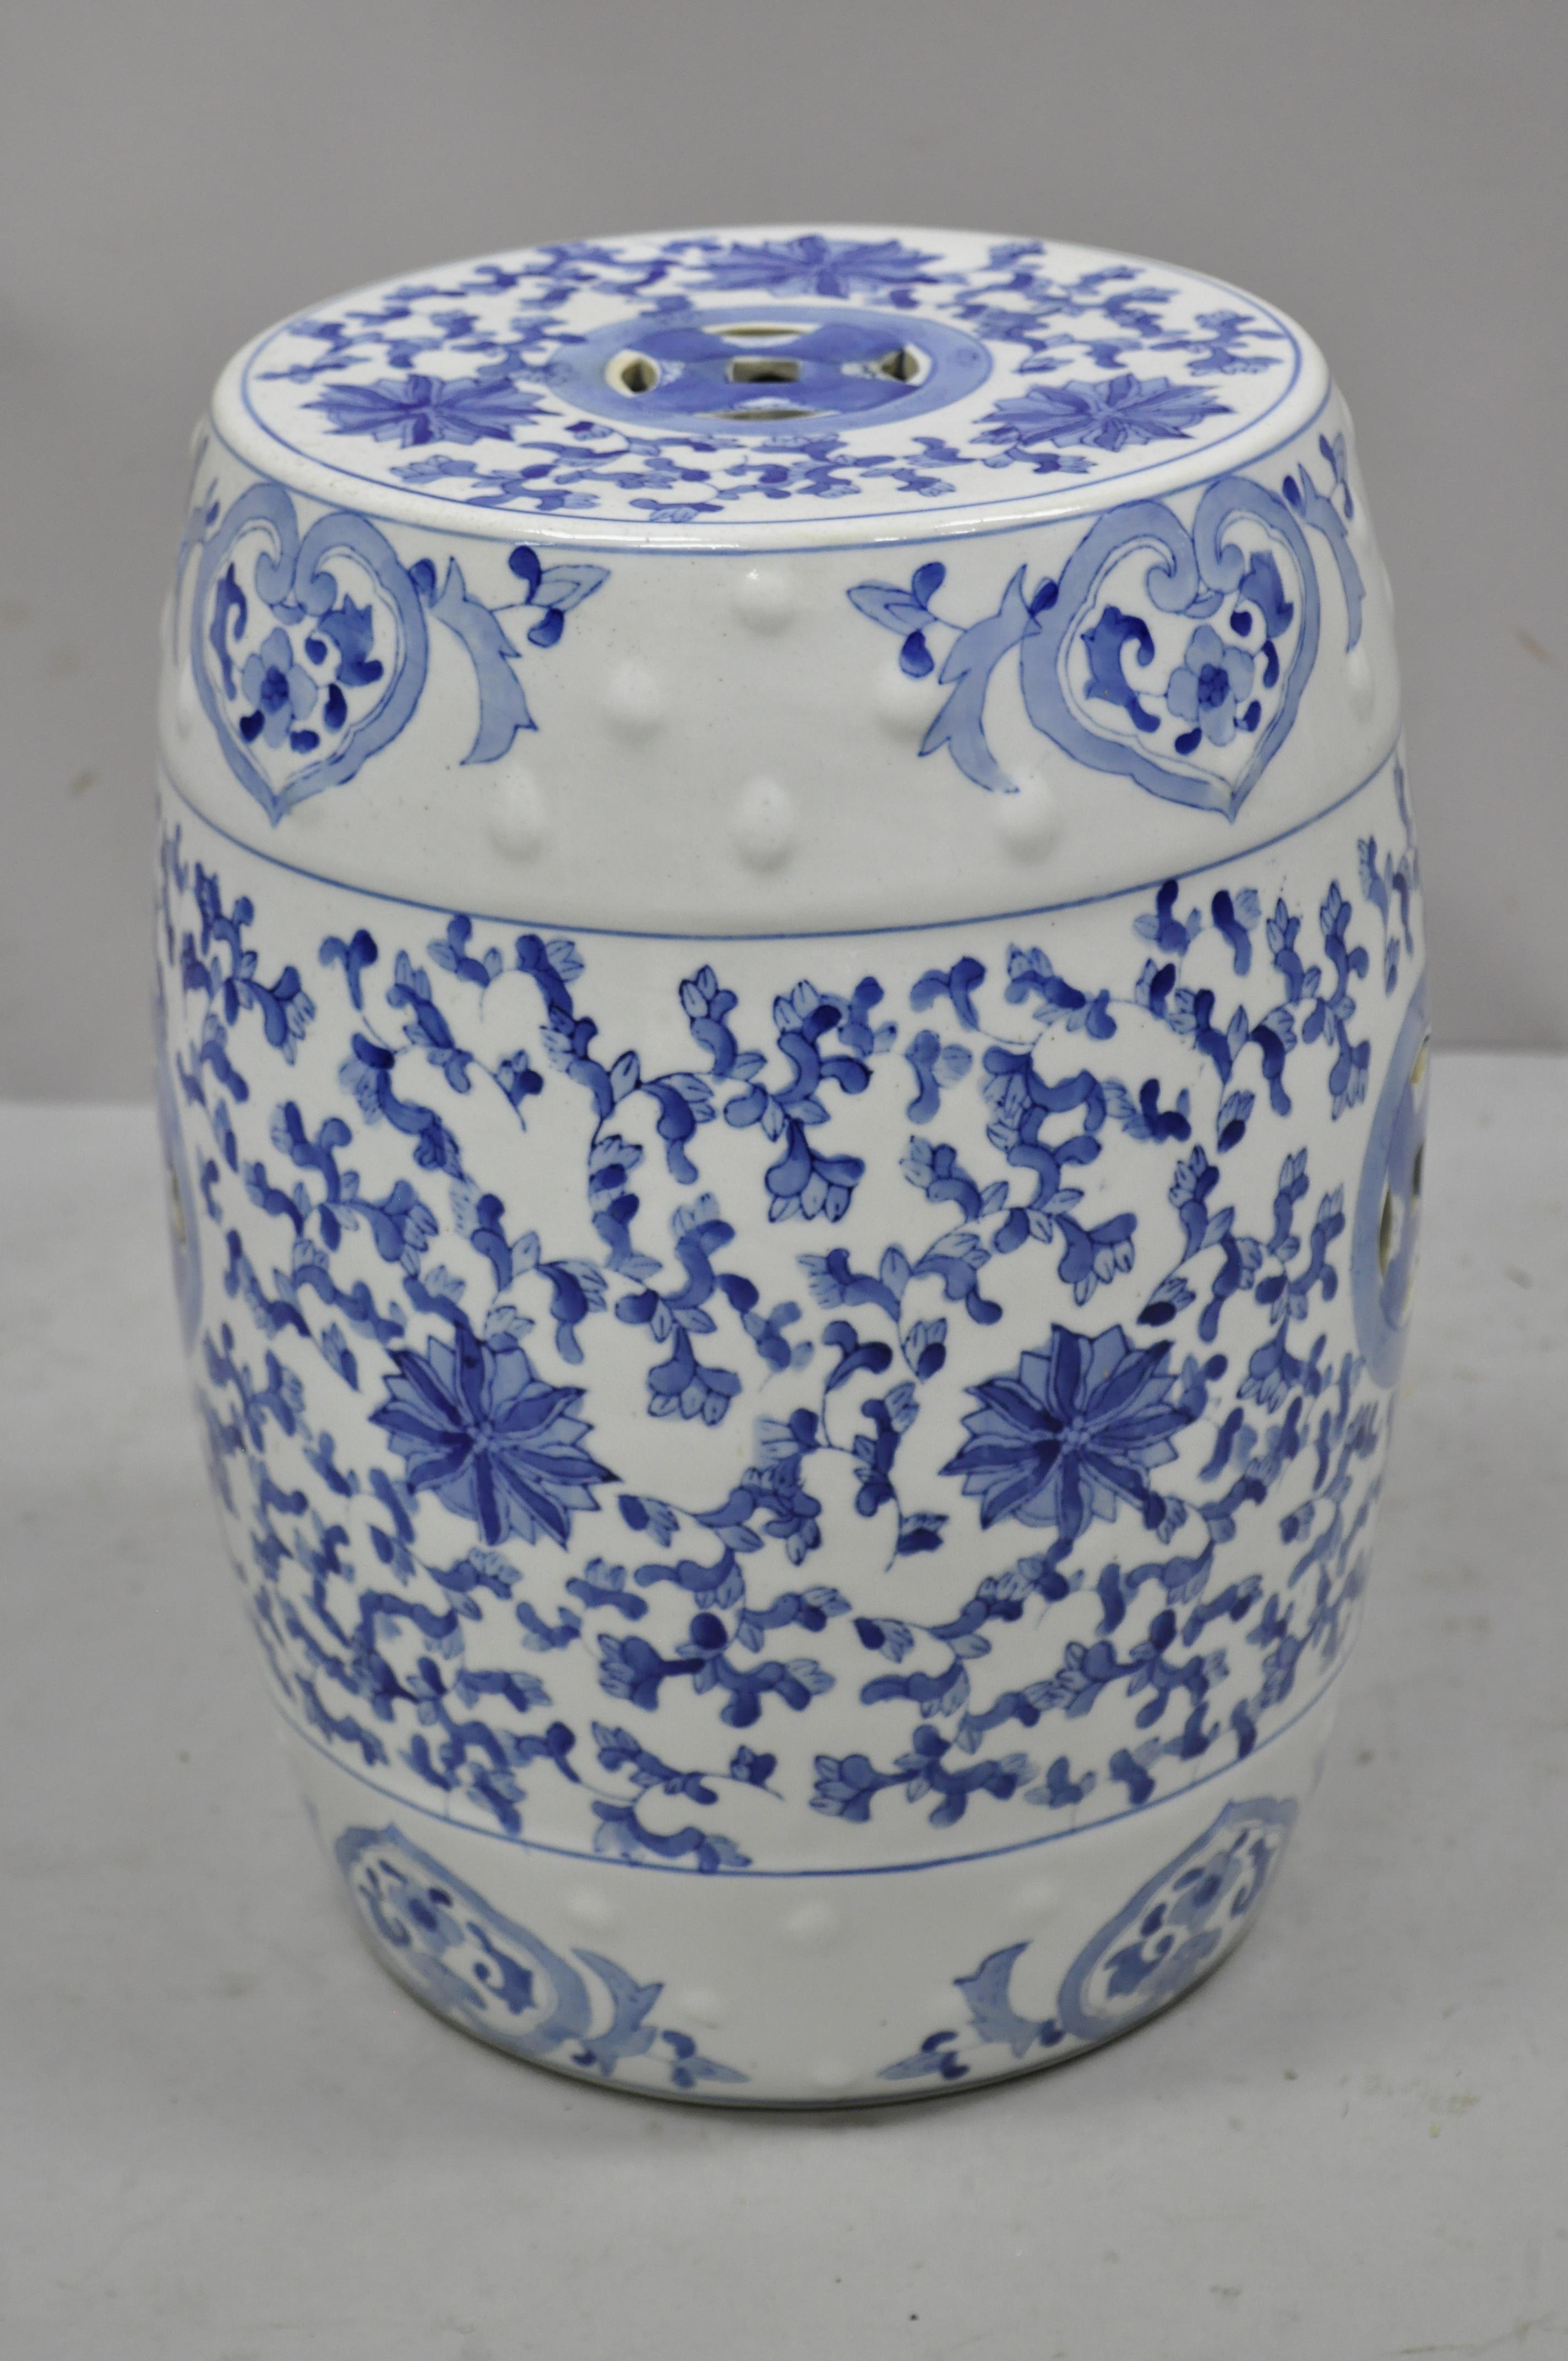 Asian Vintage Chinese Export Porcelain Blue White Garden Drum Seat Stool with Flowers